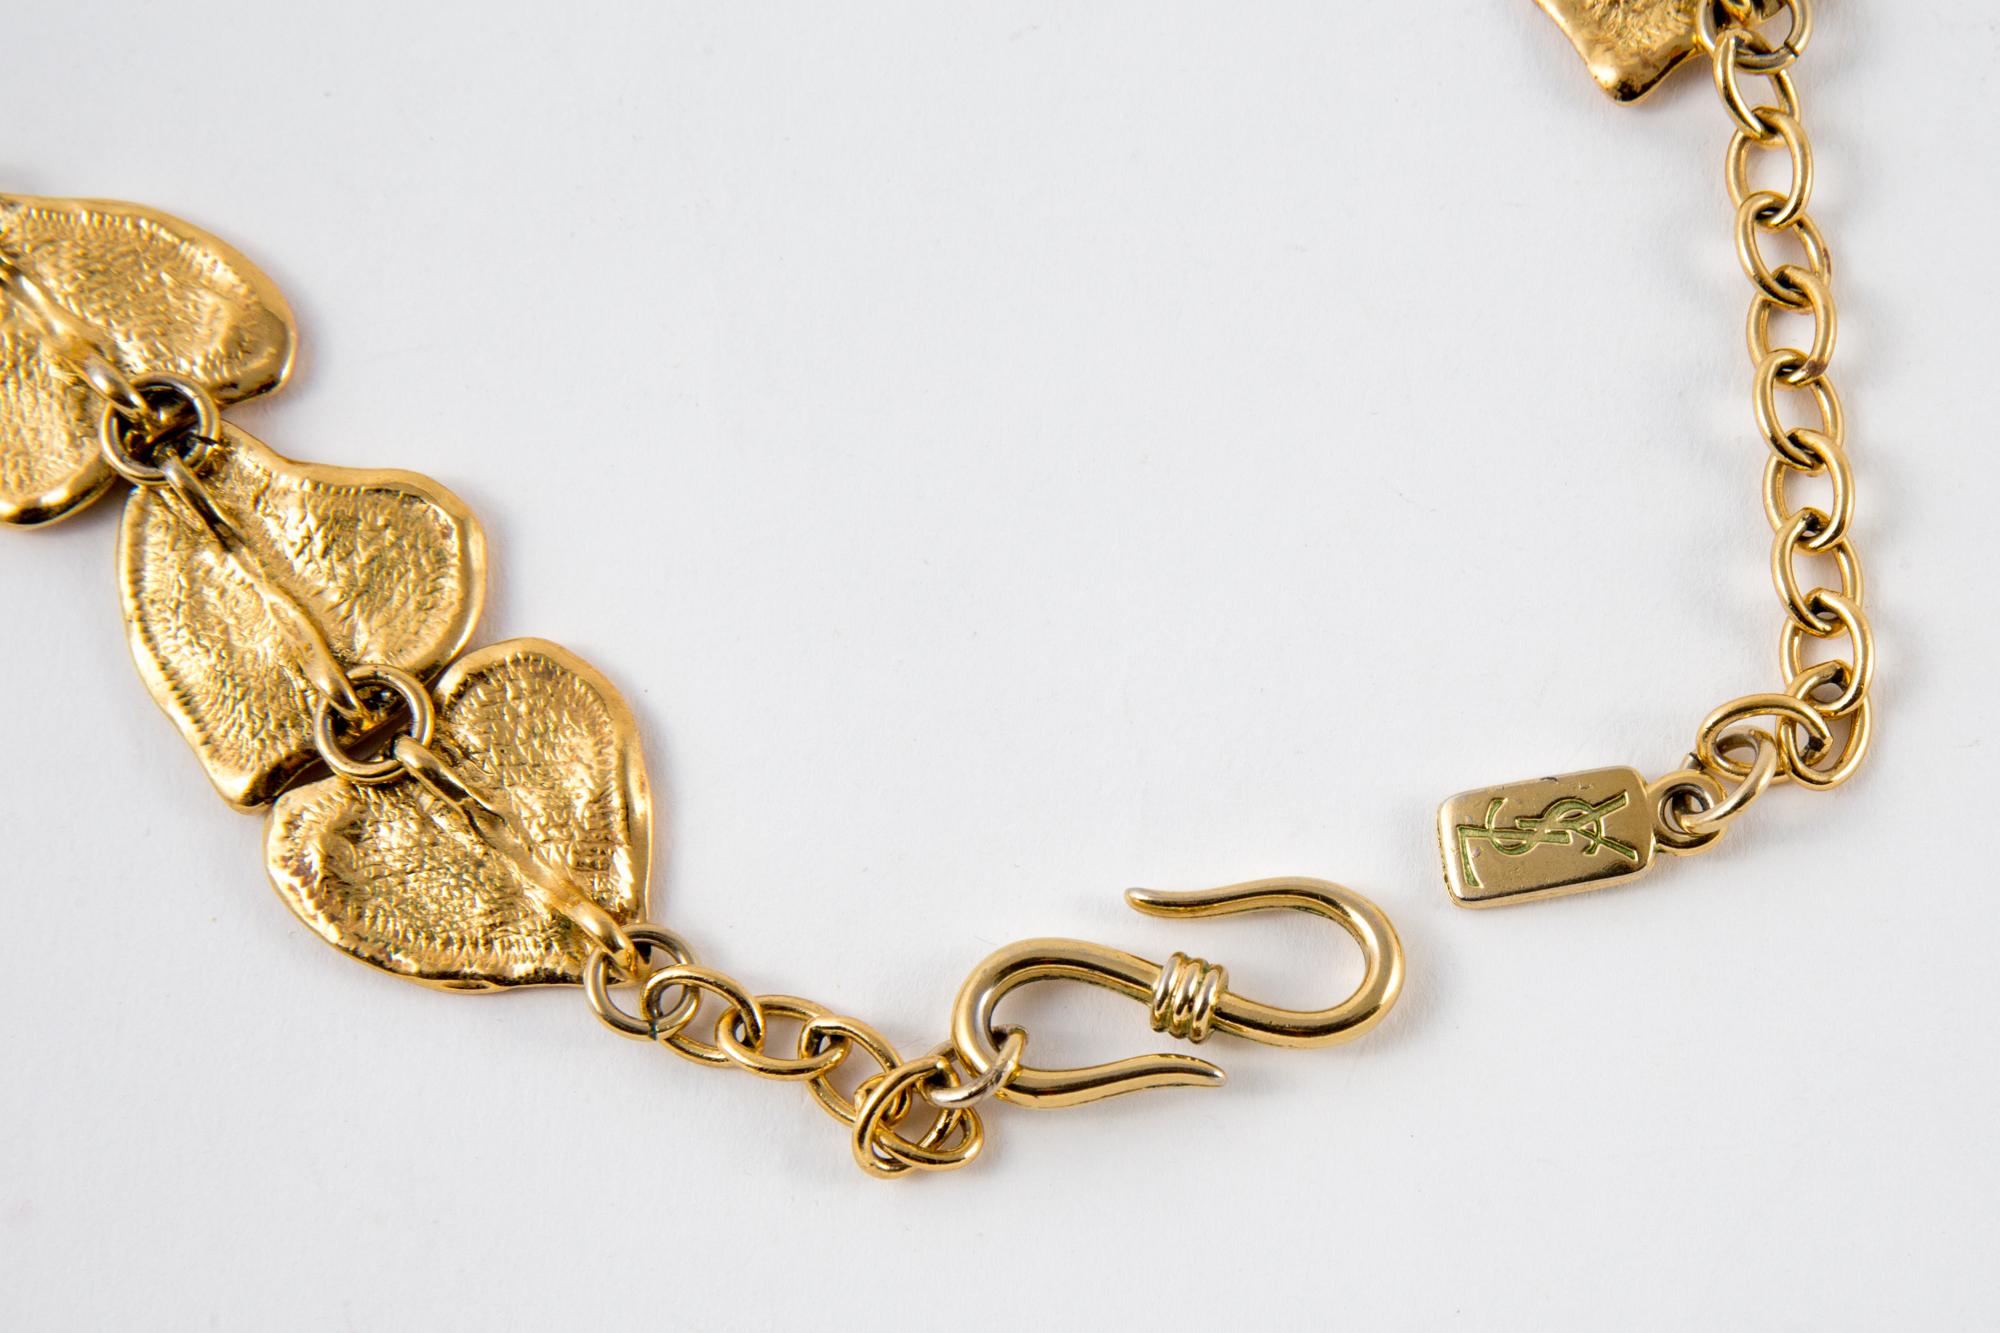  1980s Yves Saint Laurent YSL Gold Tone Hearts Necklace    1